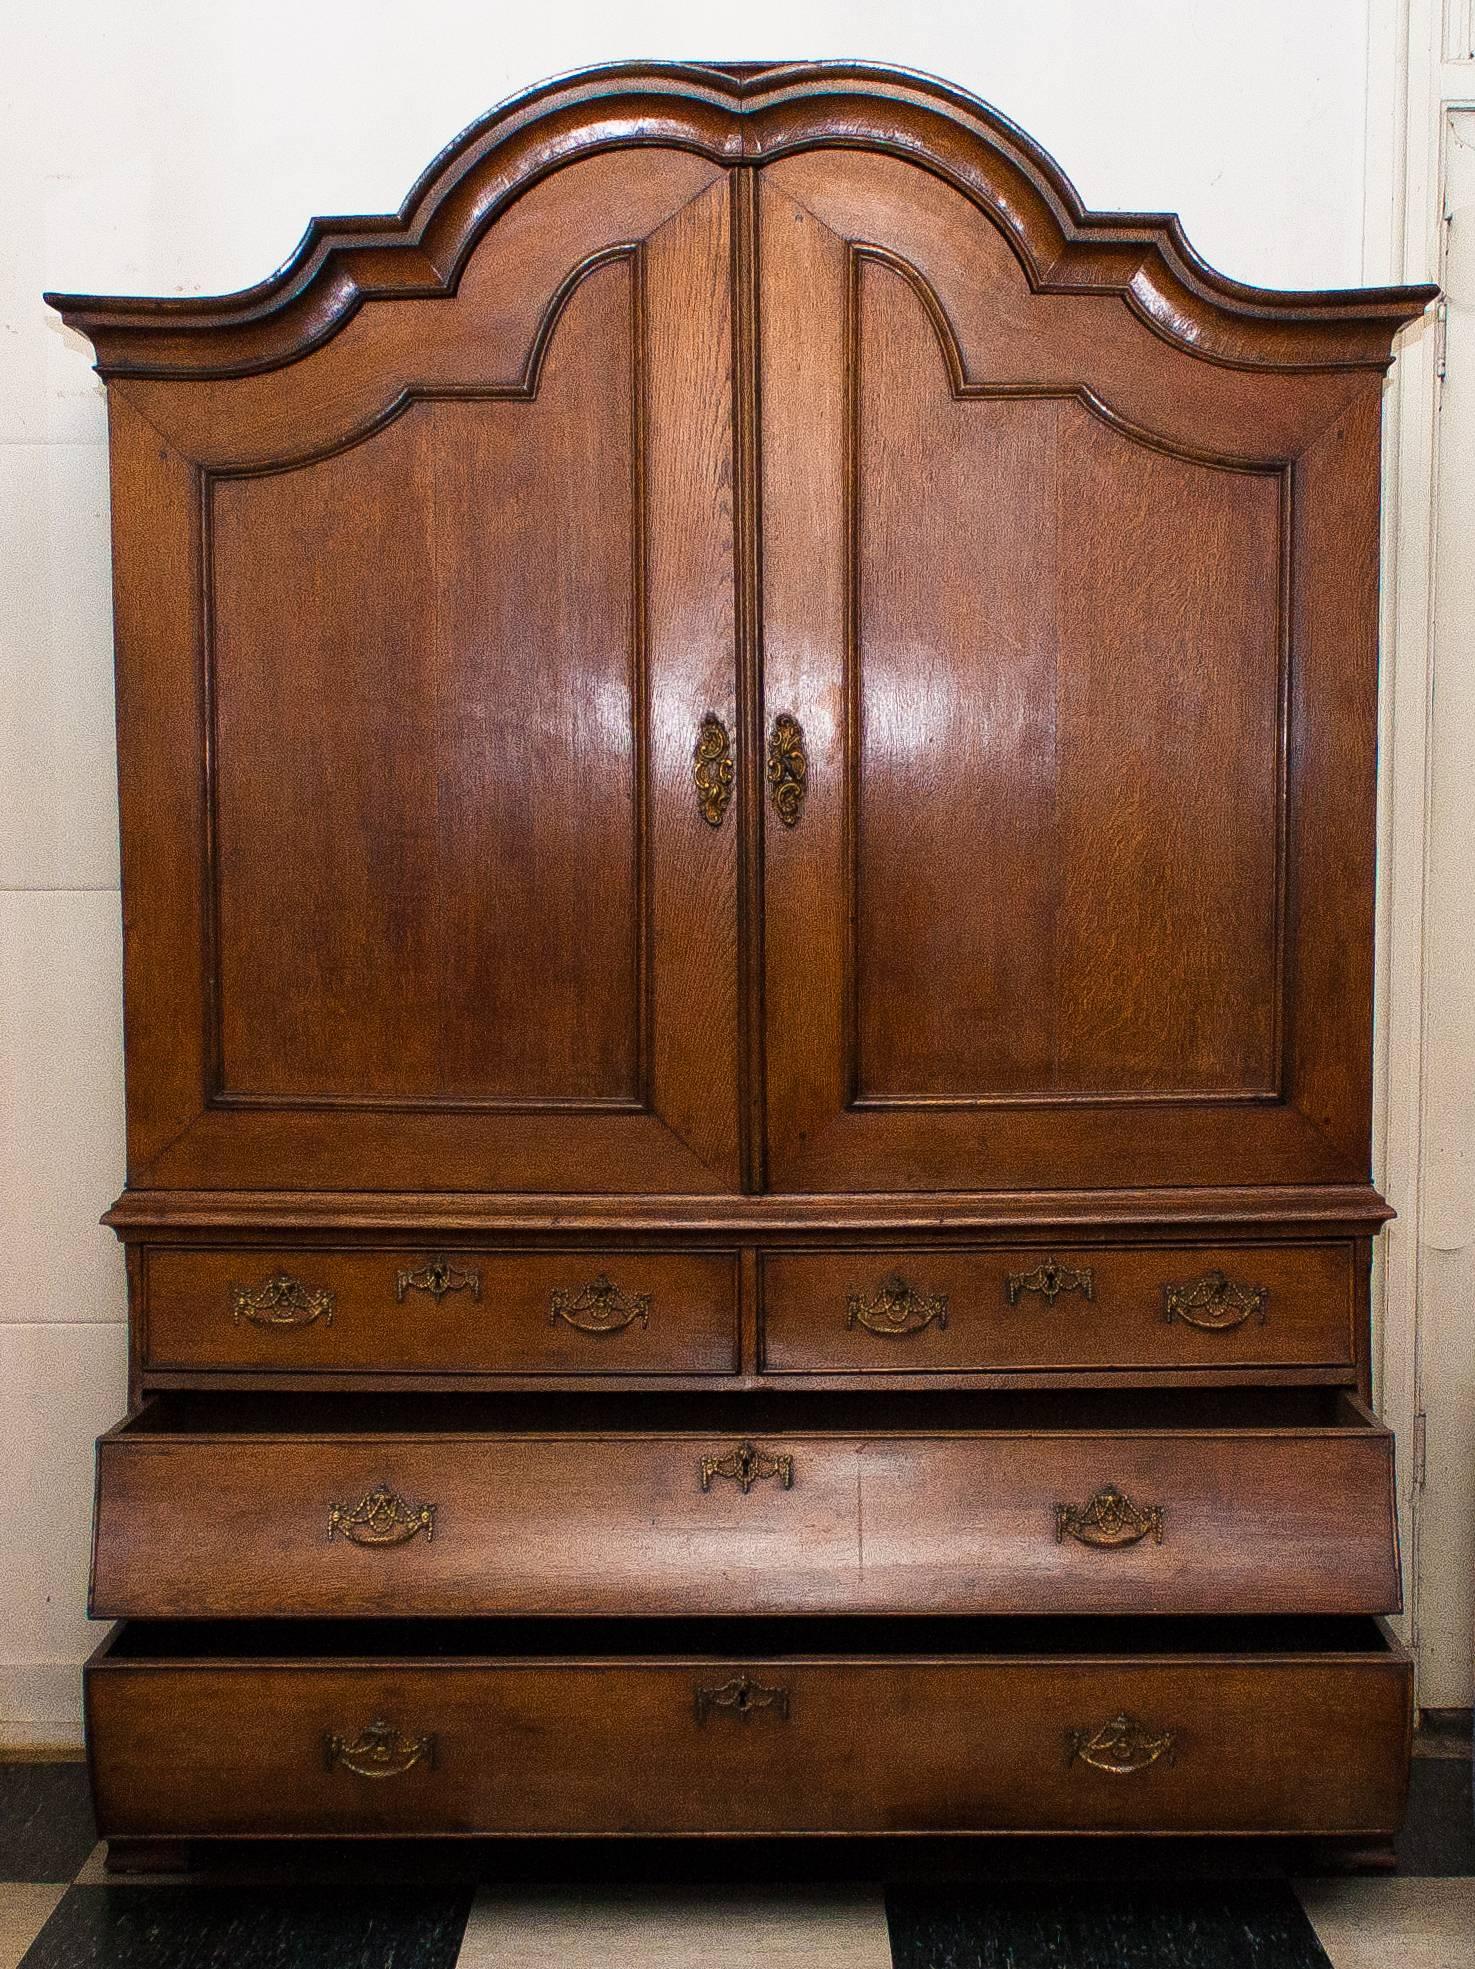 Antique oak cabinet.
Made circa 1820.
Coming from the province of Gelderland (the Netherlands).

Measures: Height 221 cm,
width 155 cm,
depth 54 cm.